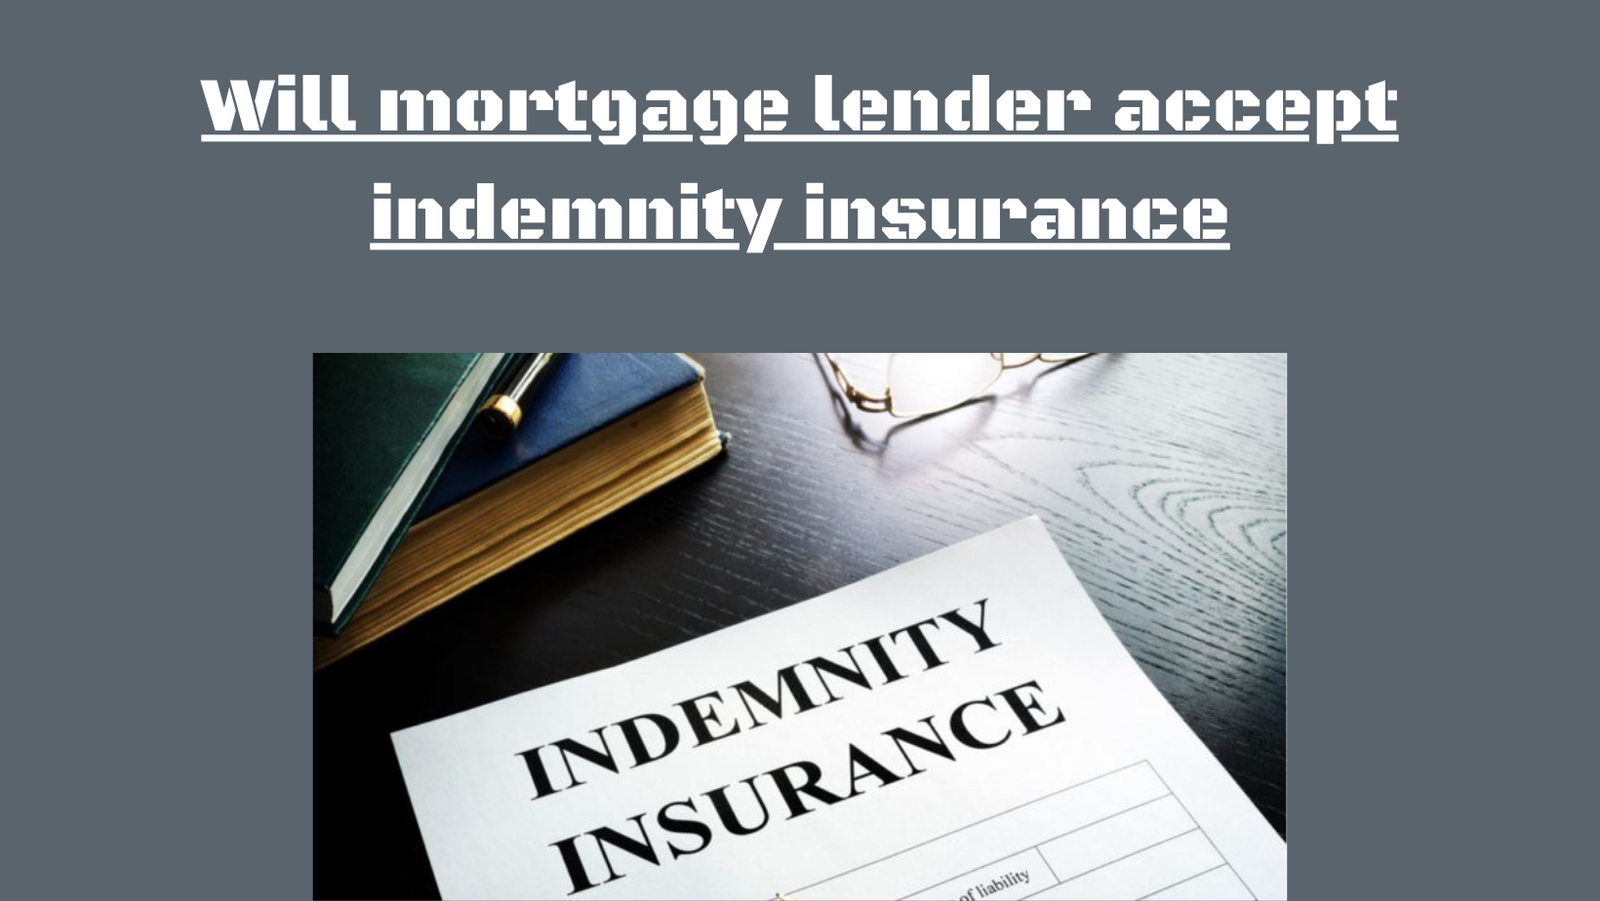 Featured image of an article on Will mortgage lender accept indemnity insurance